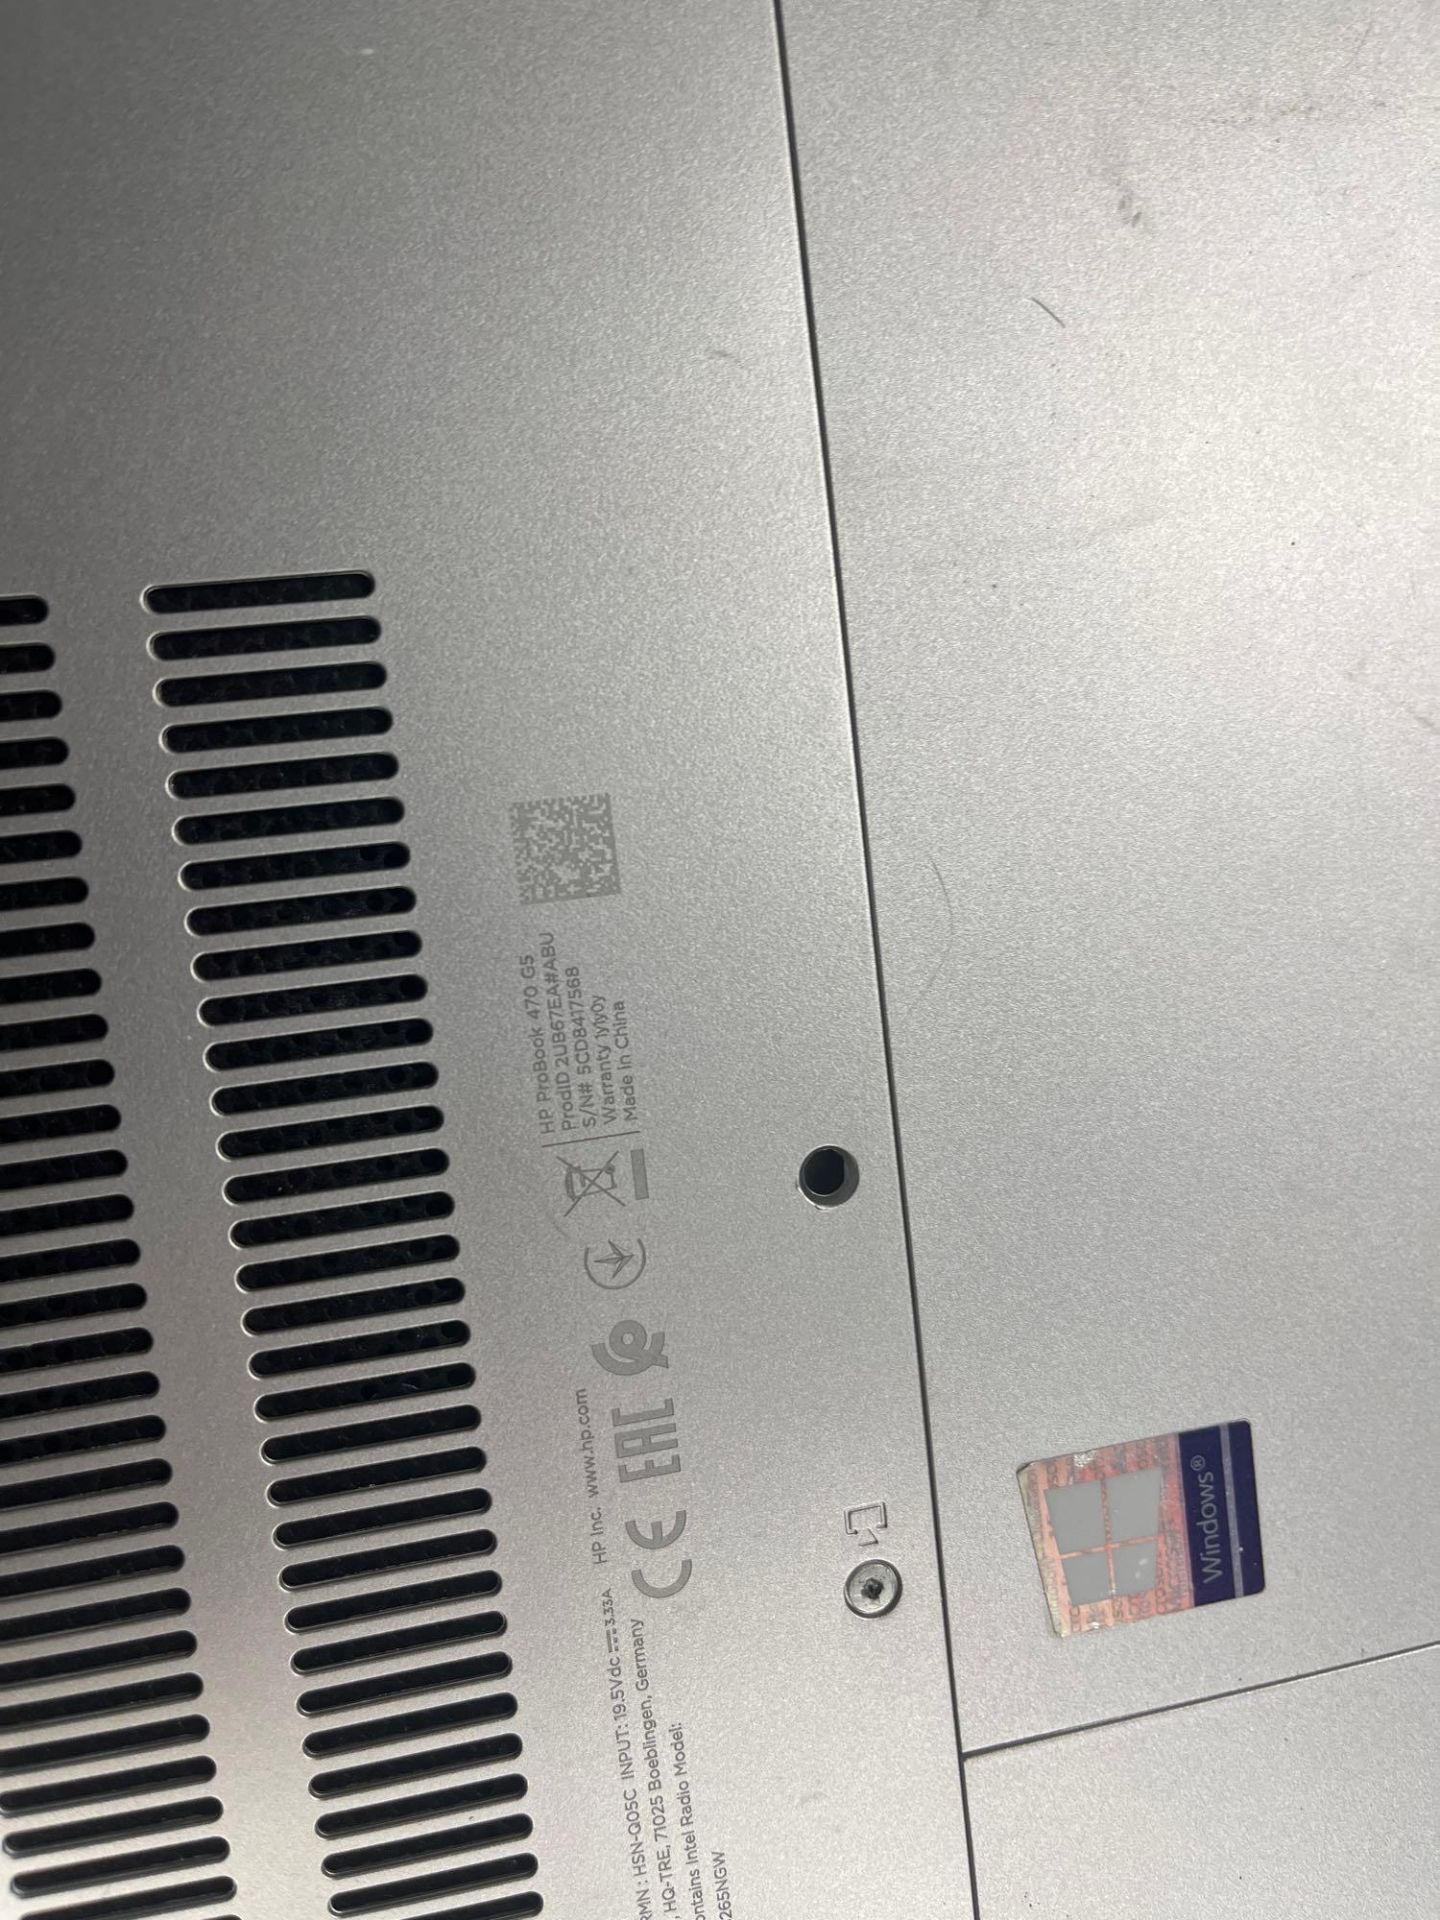 HP ProBook 470 G5 Core i7 laptop (no charger) (wiped) - Image 4 of 5